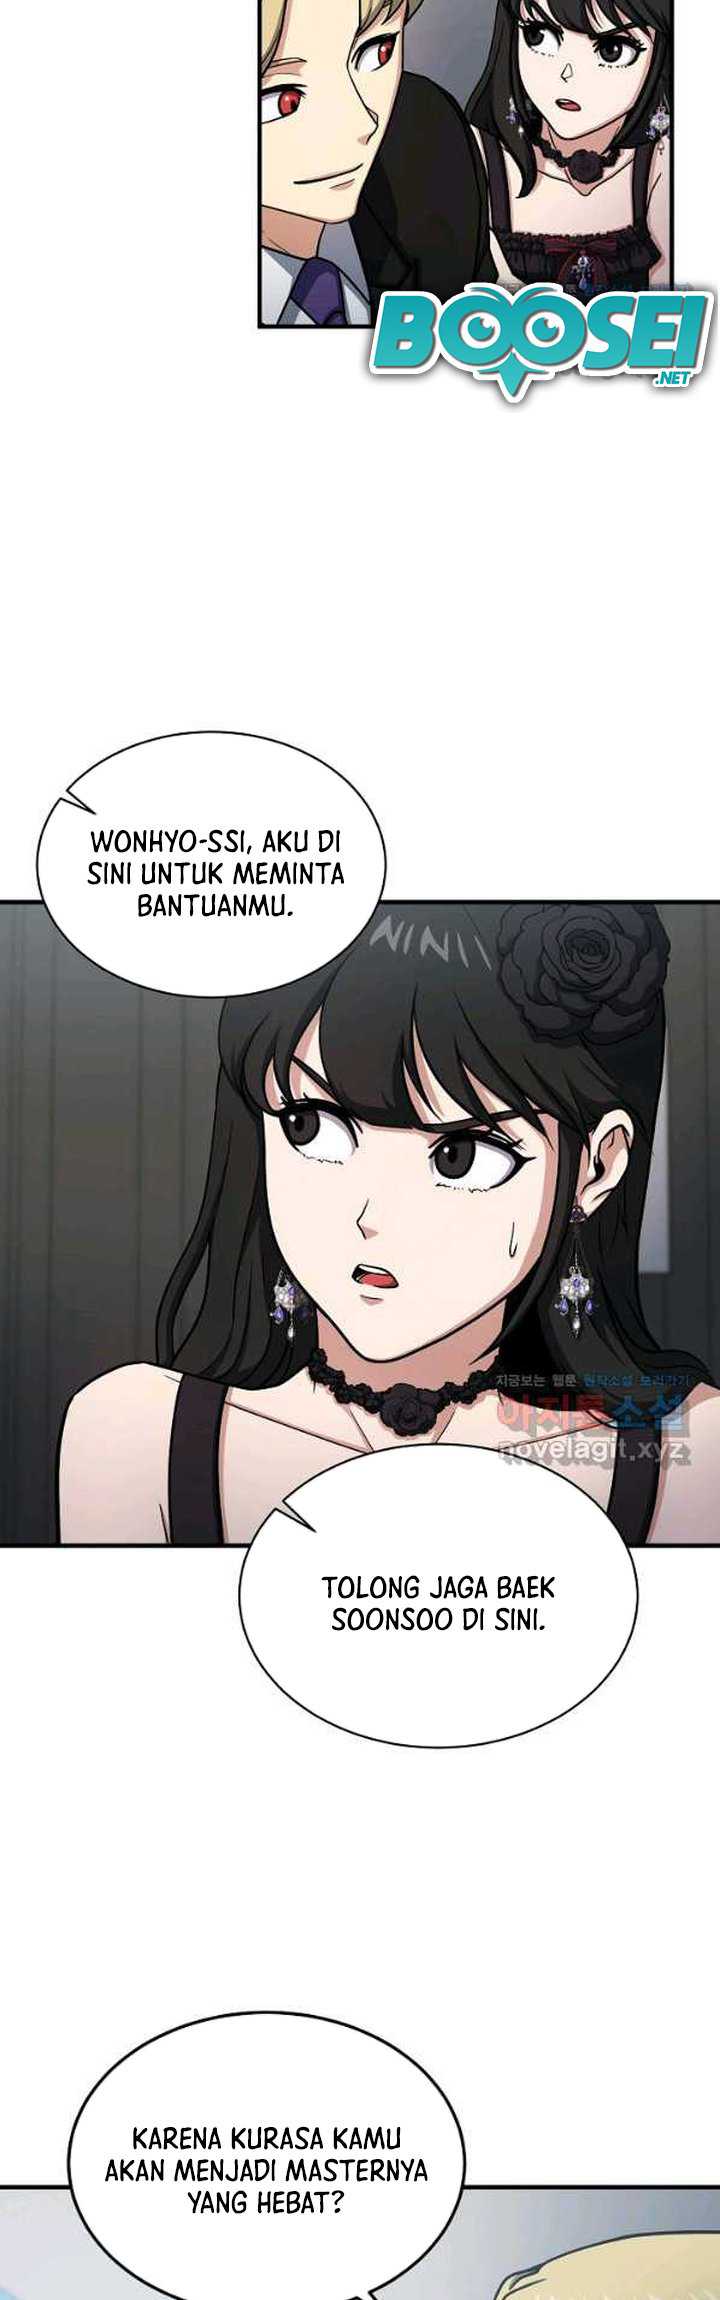 It’s Dangerous Outside My House [Dungeon House] Chapter 62